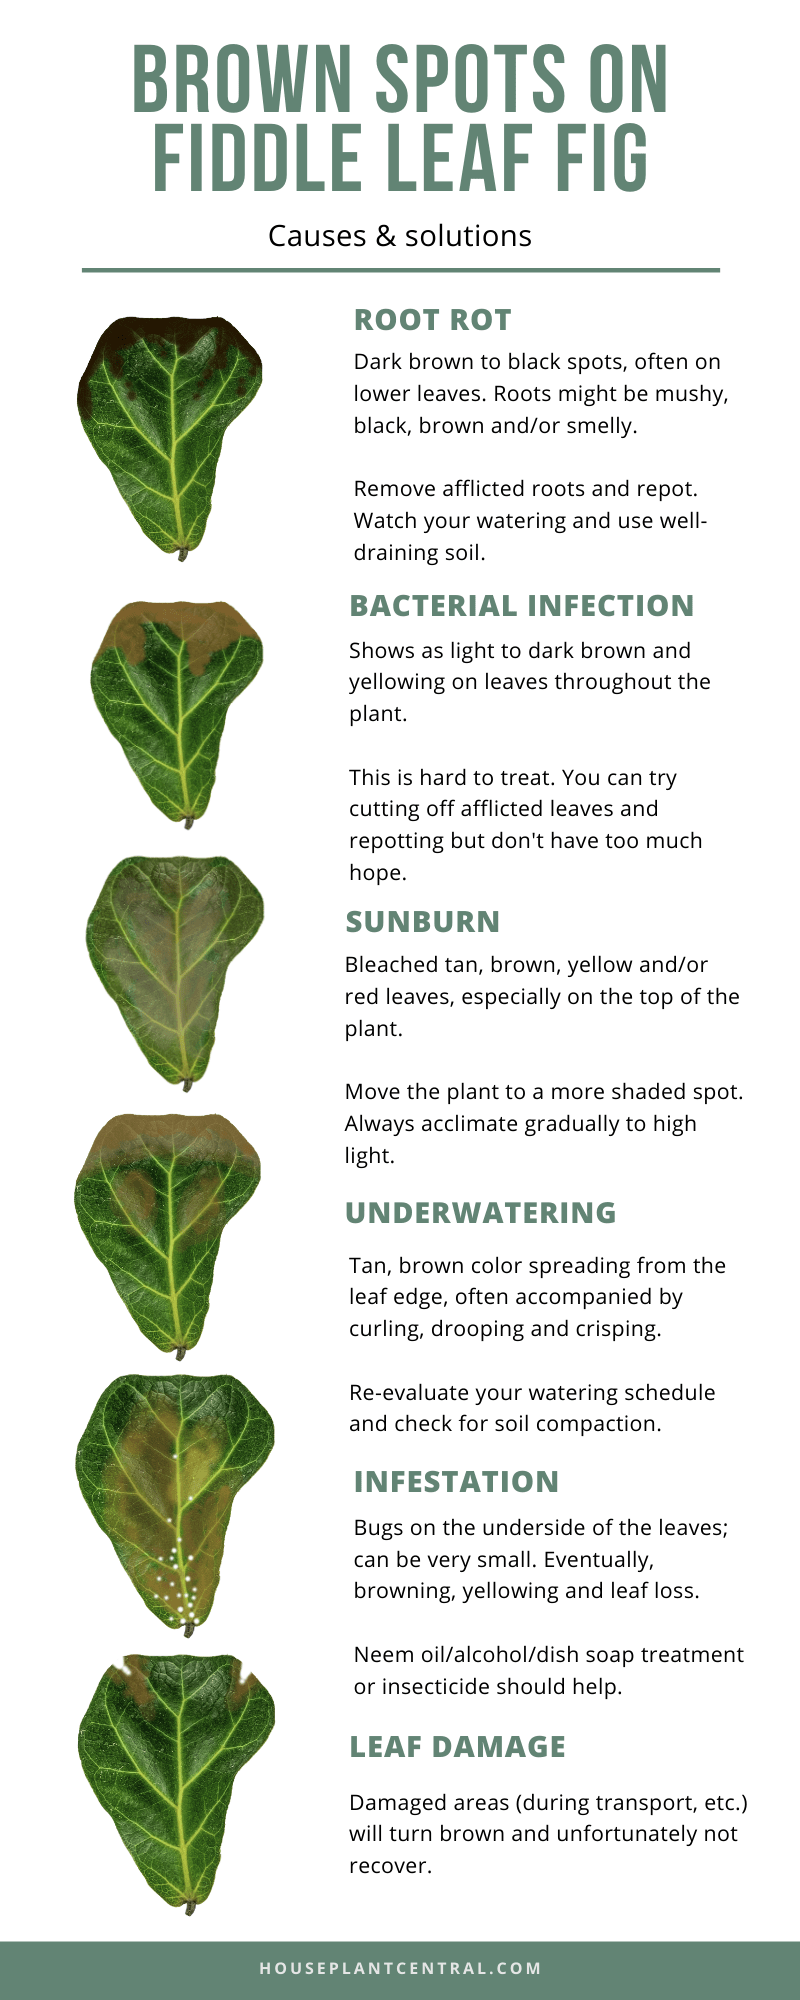 3 reasons why your fiddle leaf fig is dropping leaves